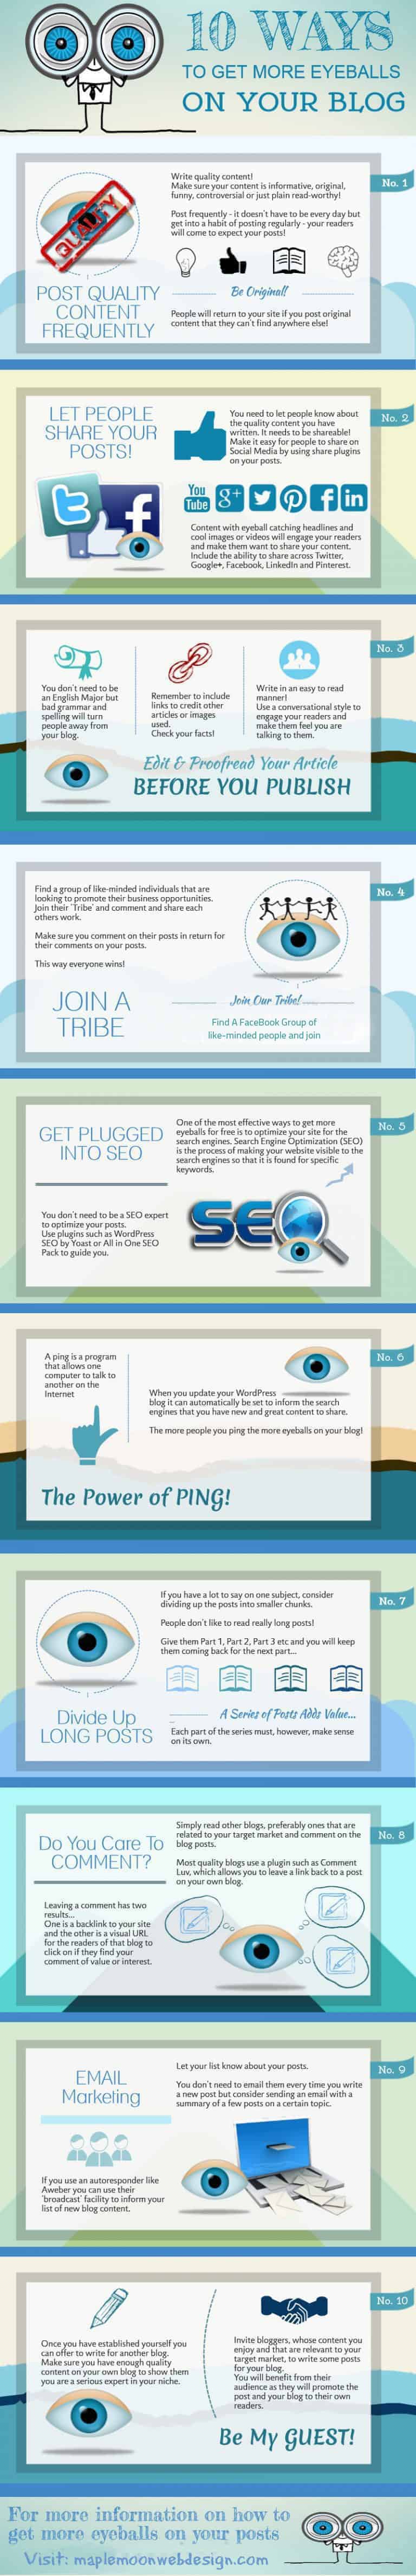 10 Ways to get more eyeballs on your blog